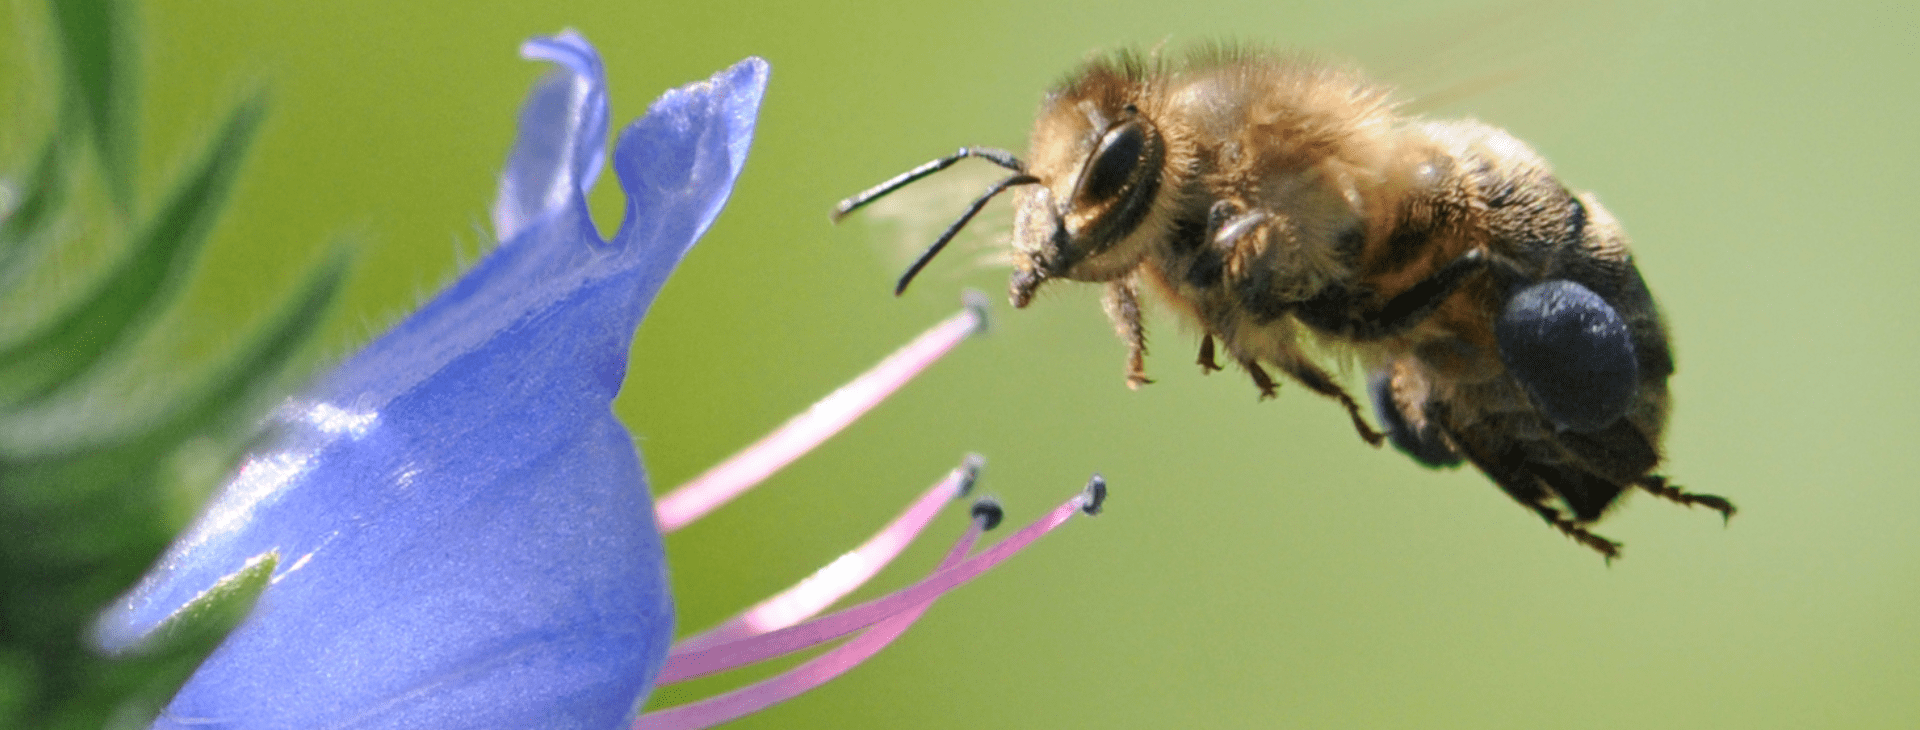 Image of a bee and a purple flower